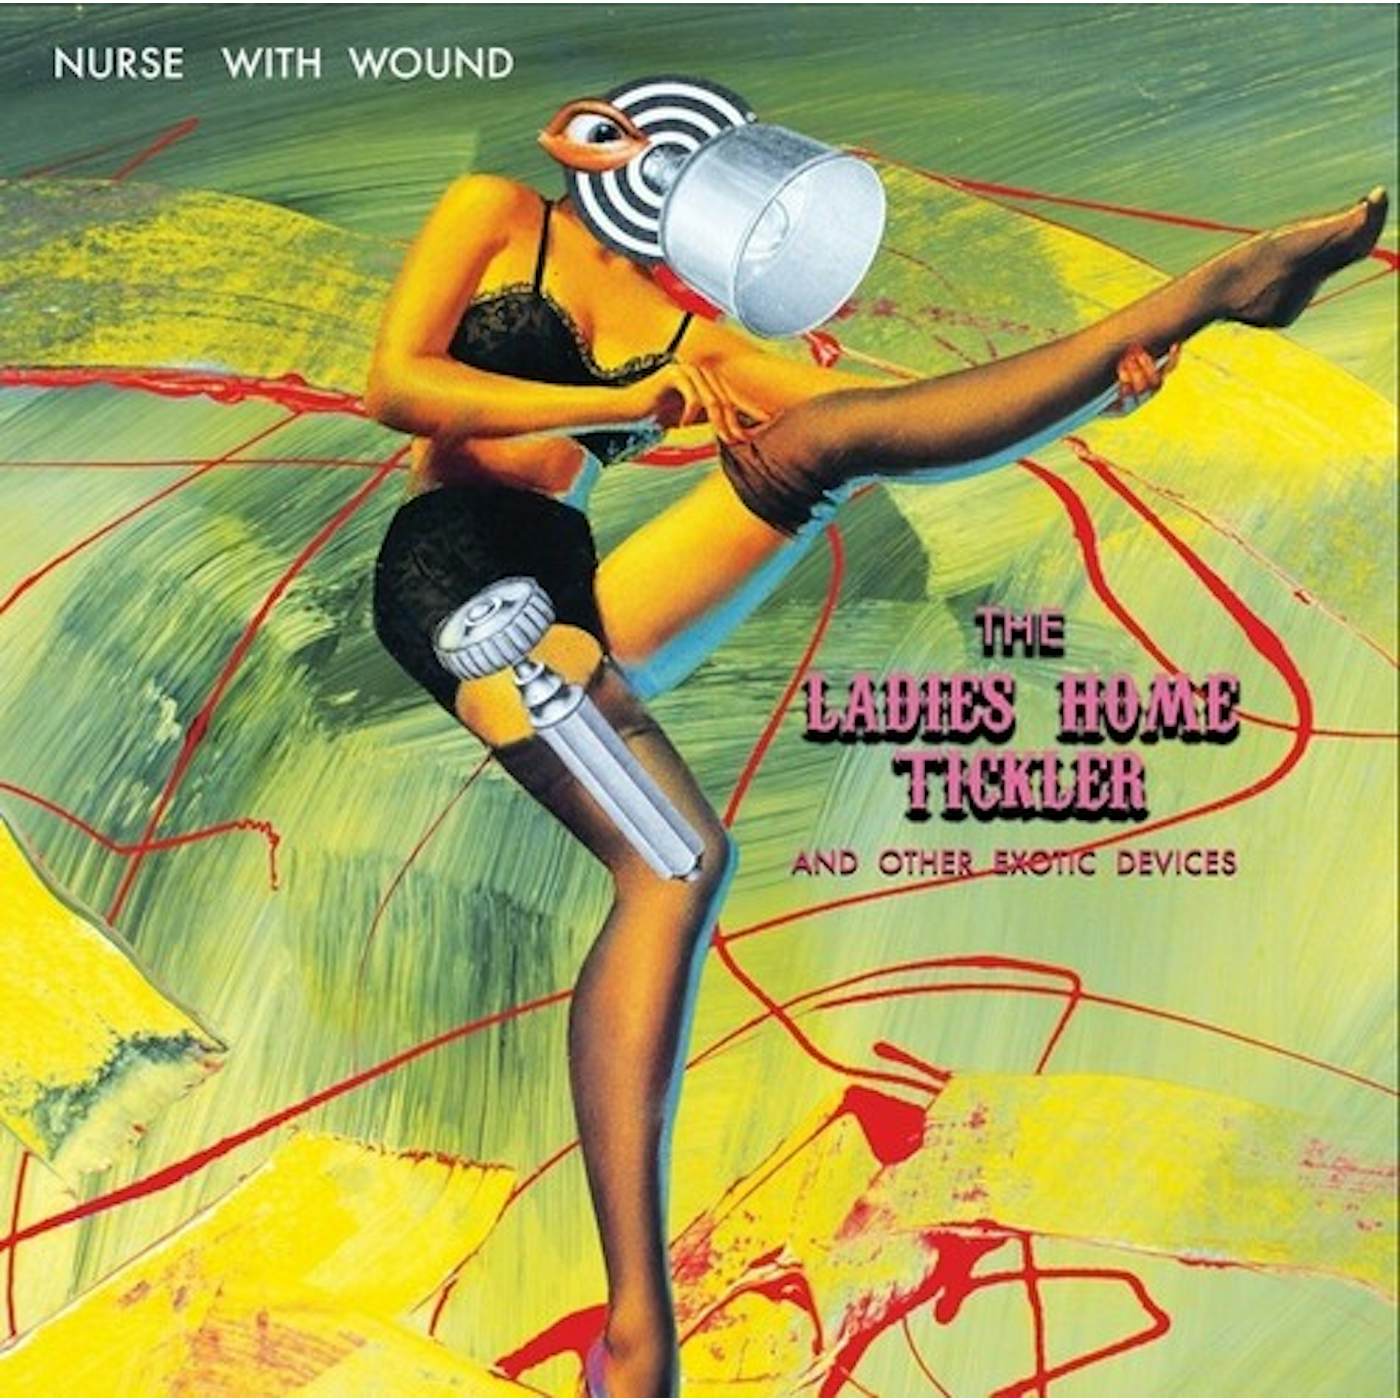 Nurse With Wound Ladies Home Tickler (Other Exotic Devices) Vinyl Record